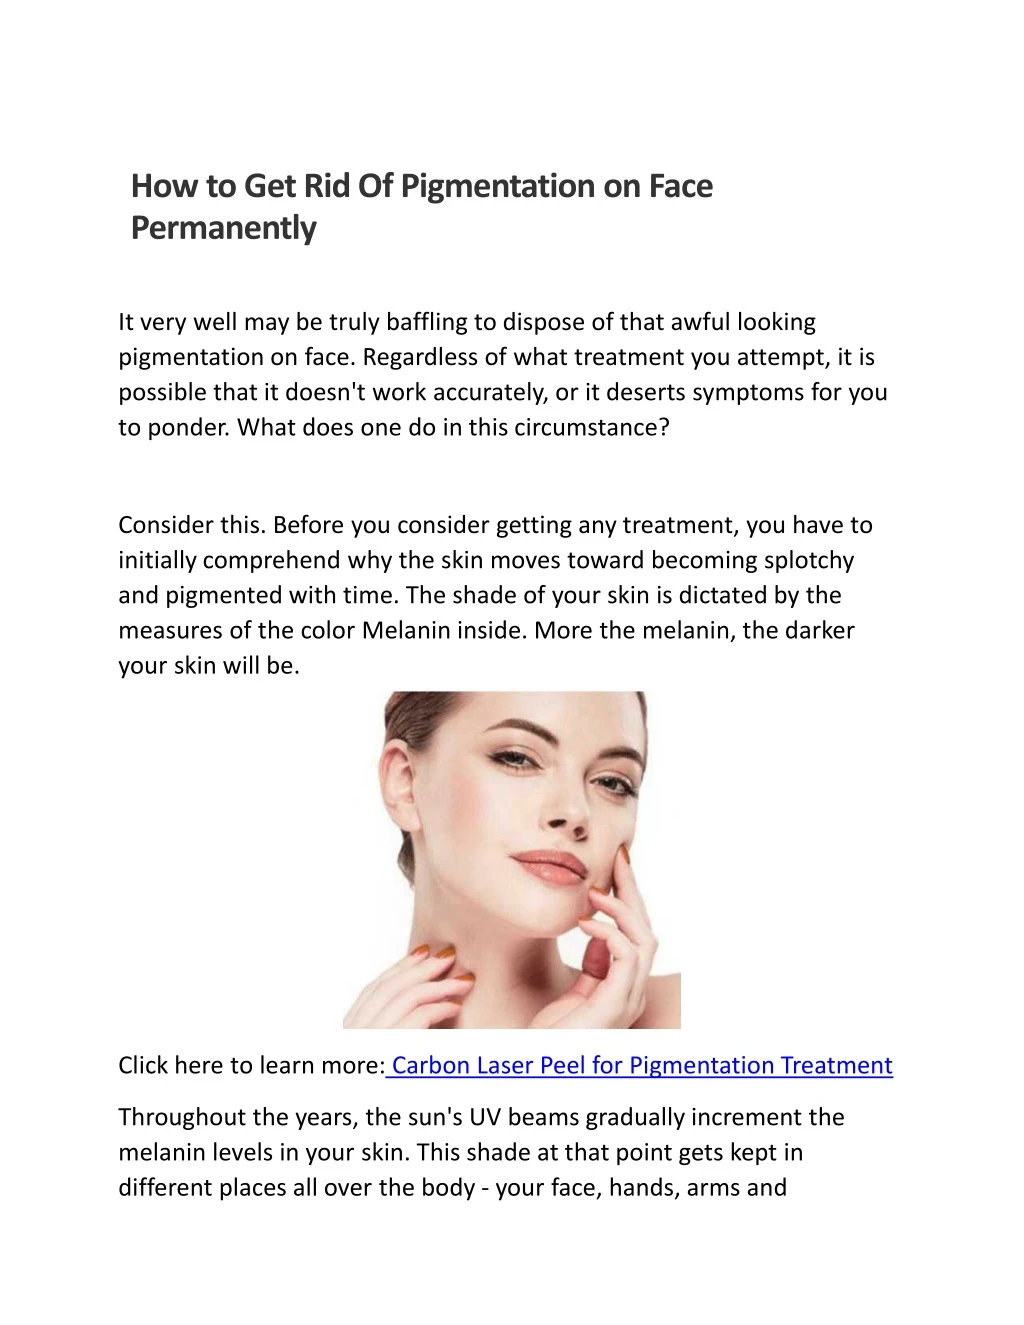 how to get rid of pigmentation on face permanently